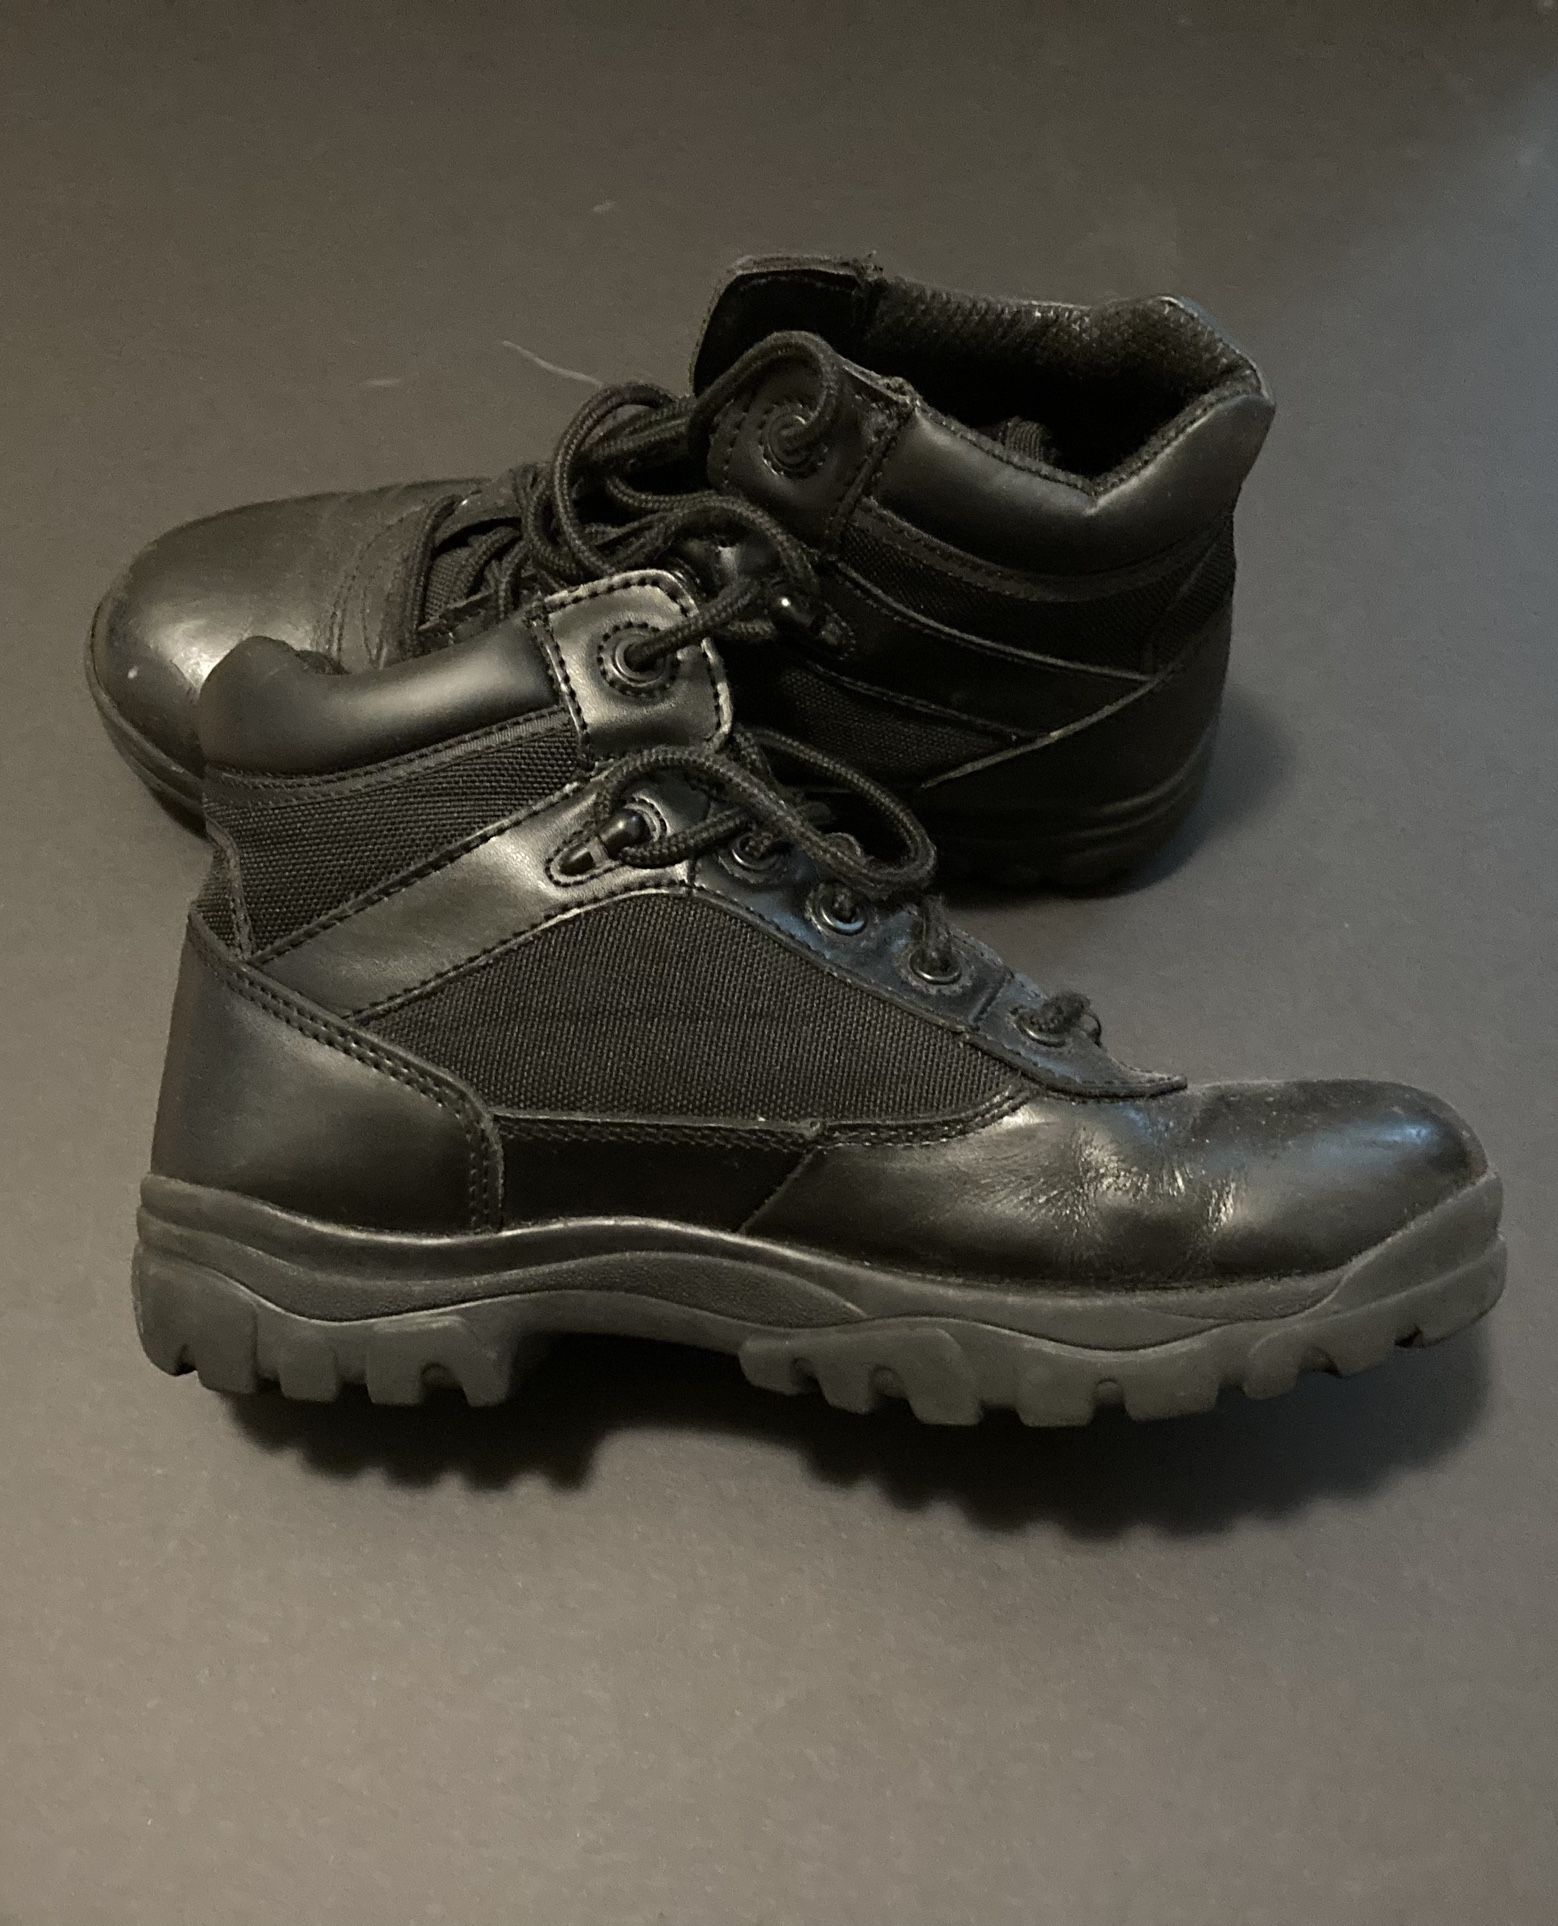 Goodyear Steel Toe Work Boots Size 8 Used